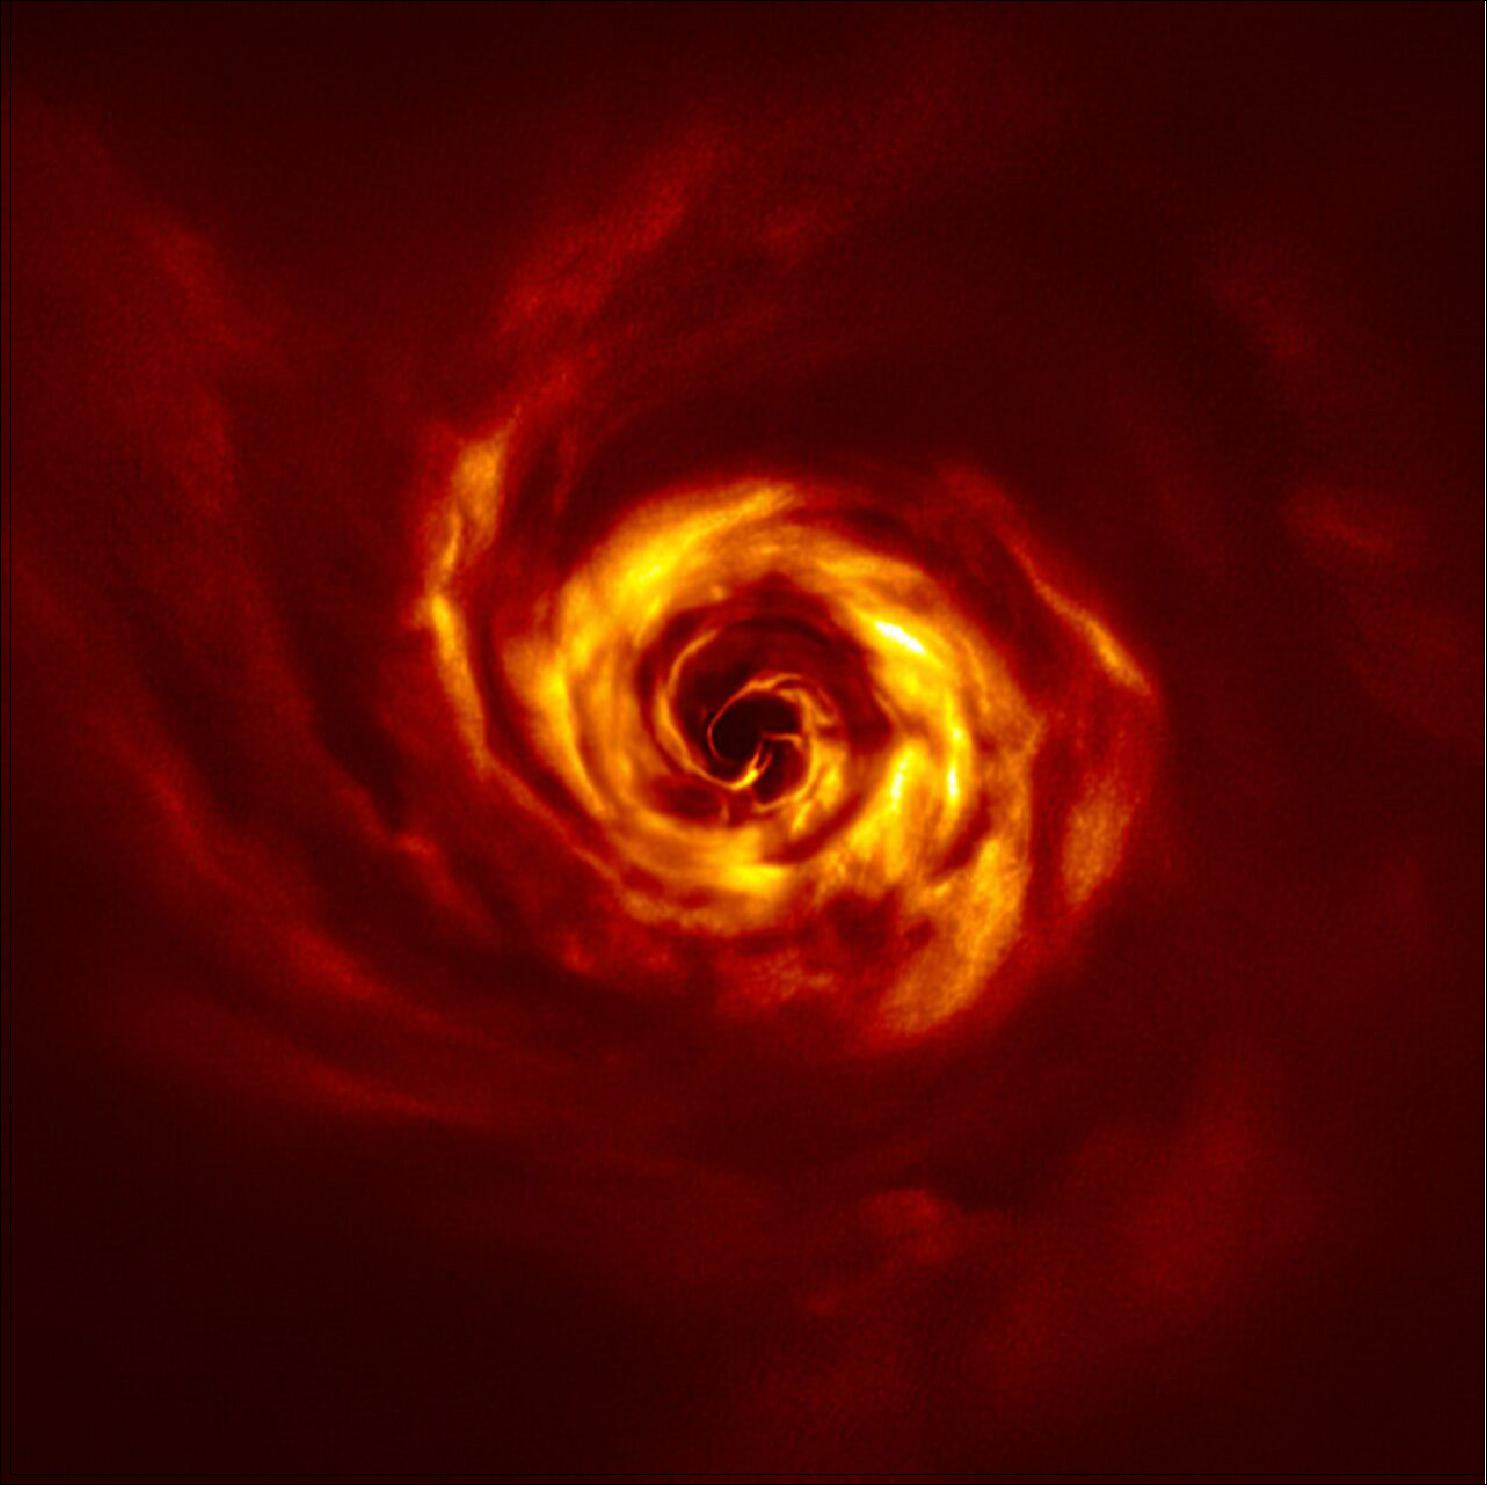 Figure 36: This image shows the disc around the young AB Aurigae star, where ESO’s Very Large Telescope (VLT) has spotted signs of planet birth. Close to the center of the image, in the inner region of the disc, we see the ‘twist’ (in very bright yellow) that scientists believe marks the spot where a planet is forming. This twist lies at about the same distance from the AB Aurigae star as Neptune from the Sun. The image was obtained with the VLT’s SPHERE instrument in polarized light (image credit: ESO/Boccaletti et al.)